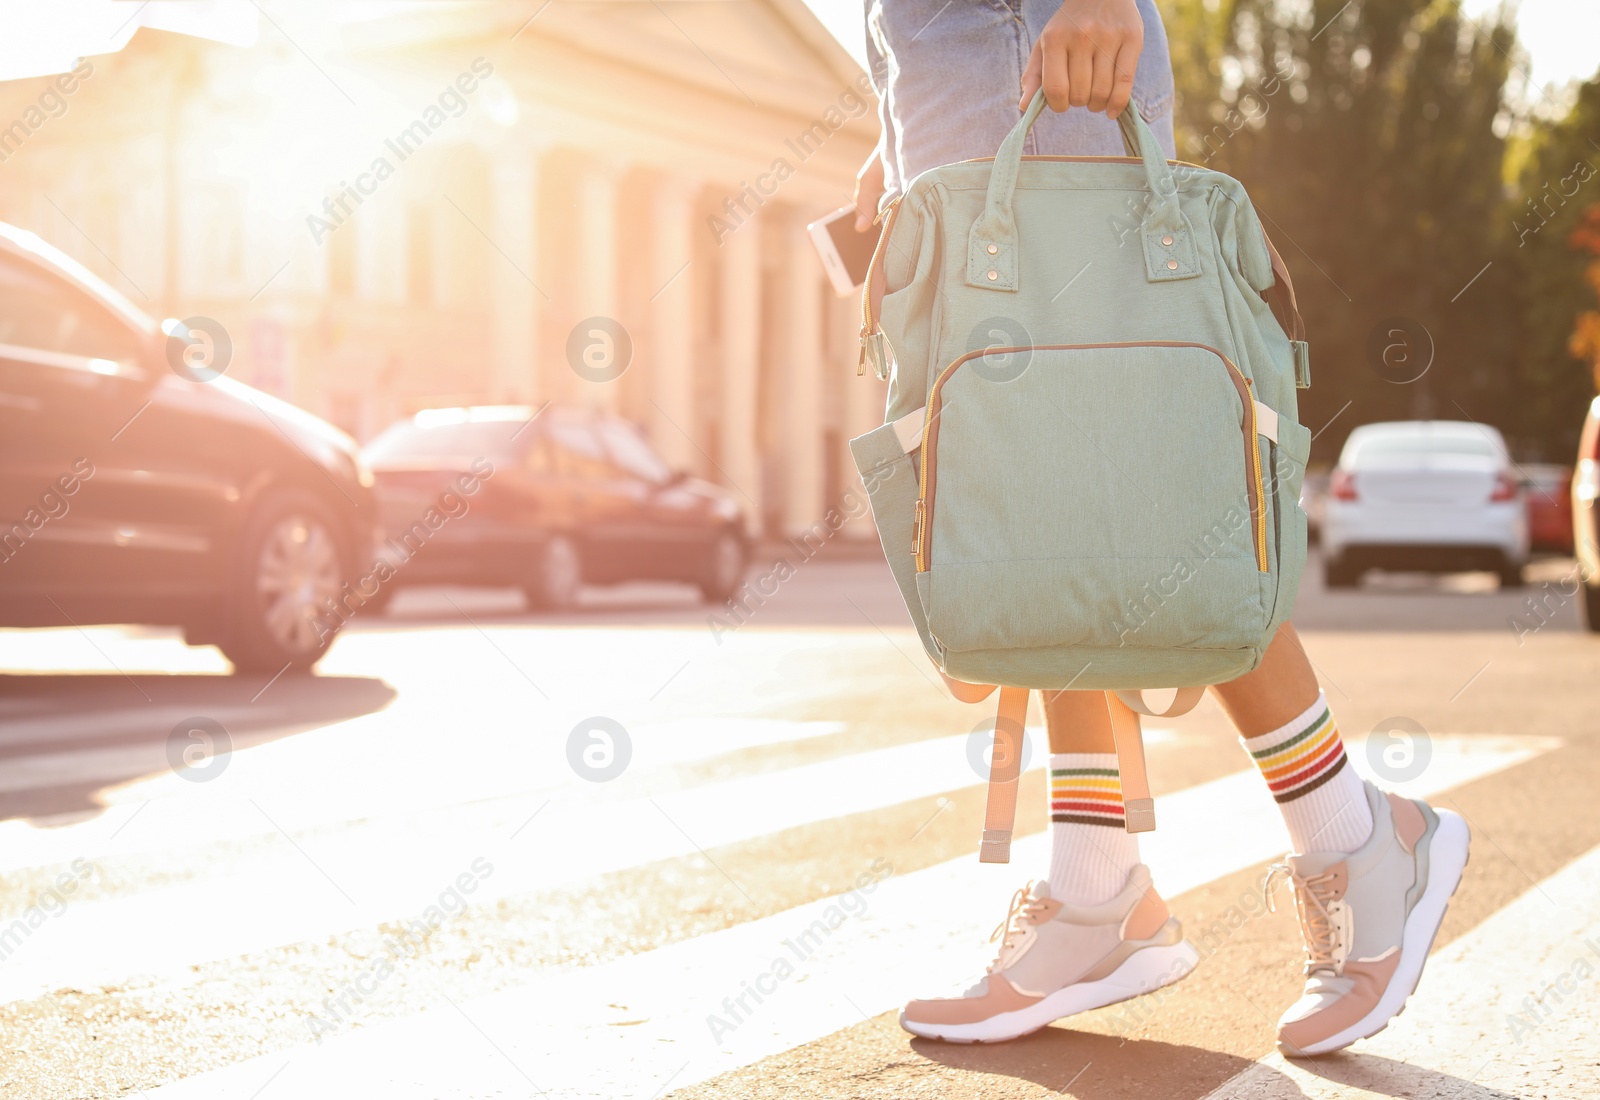 Photo of Young woman with stylish turquoise bag on city street, closeup